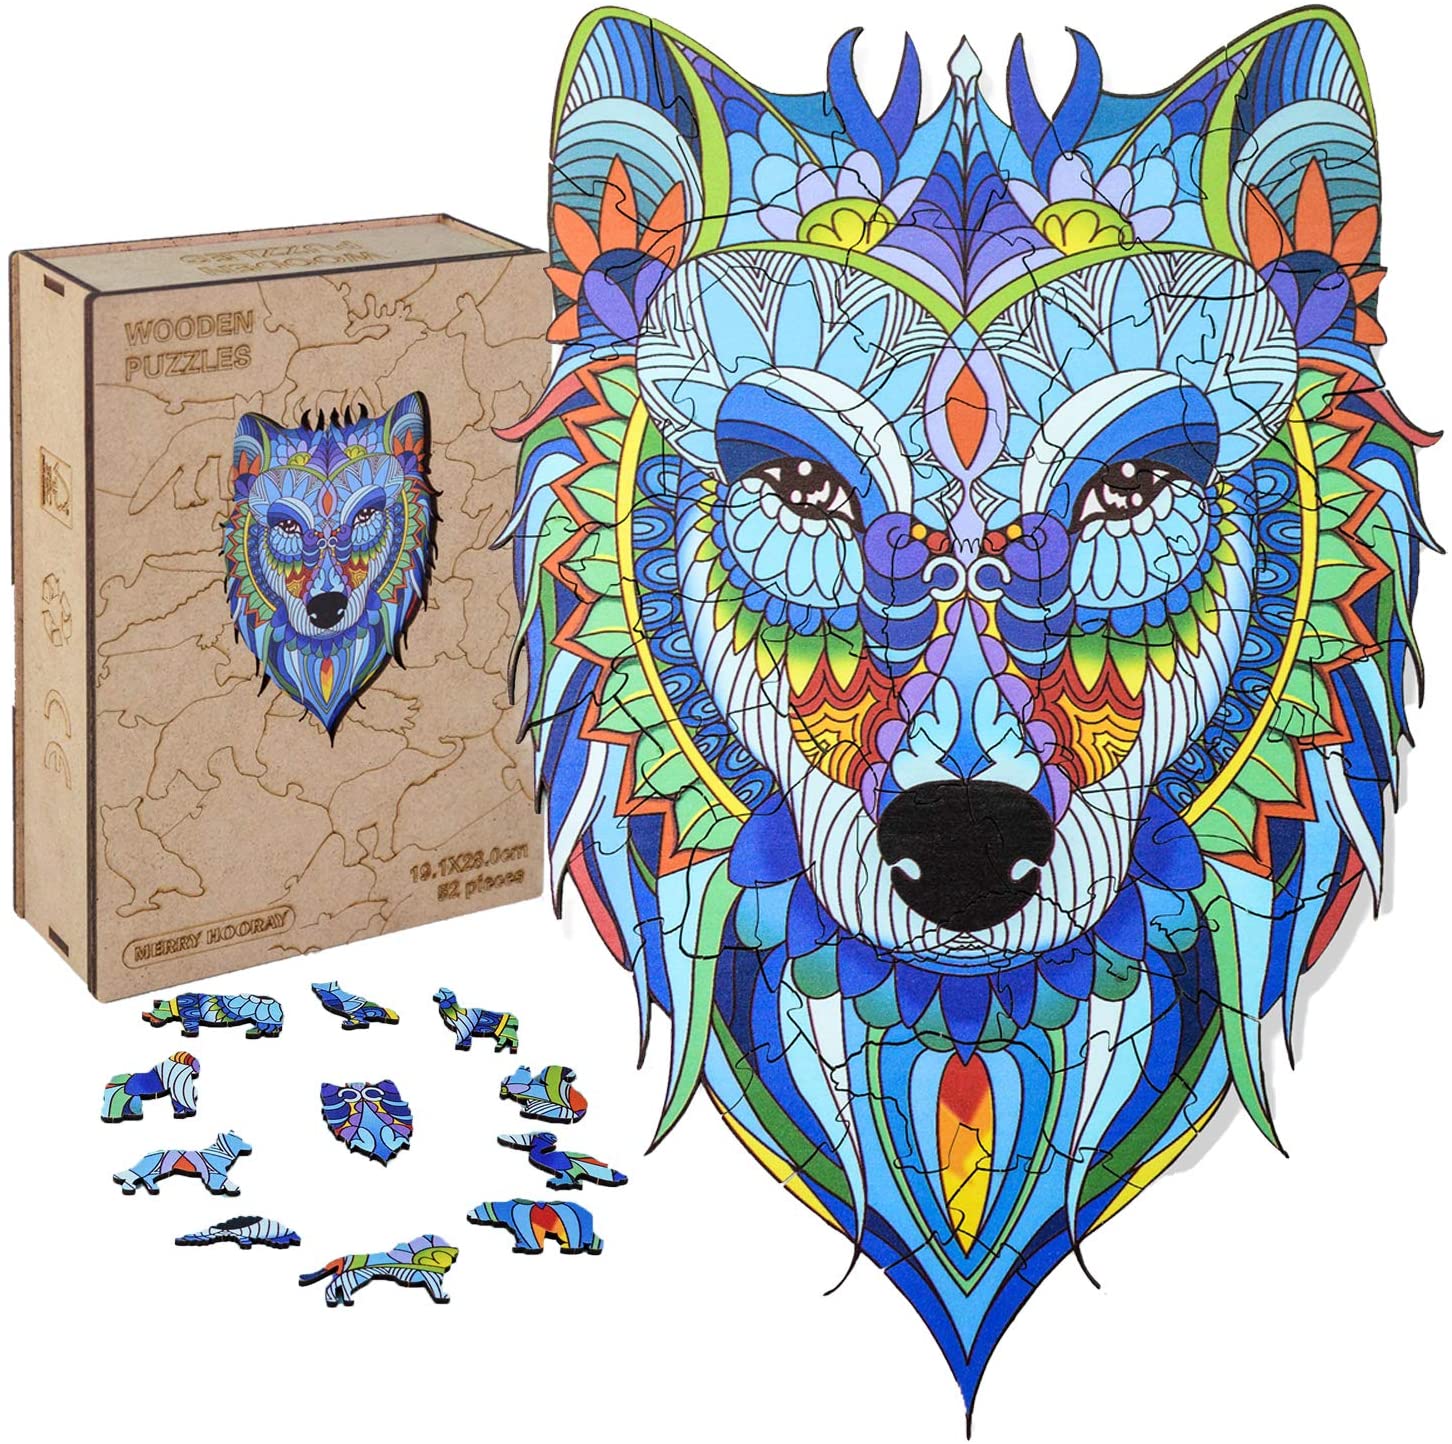 170 Pieces Unique Shape Jigsaw Pieces Best Gift for Adults and Kids Charming Fox Arfamo Wooden Jigsaw Puzzles